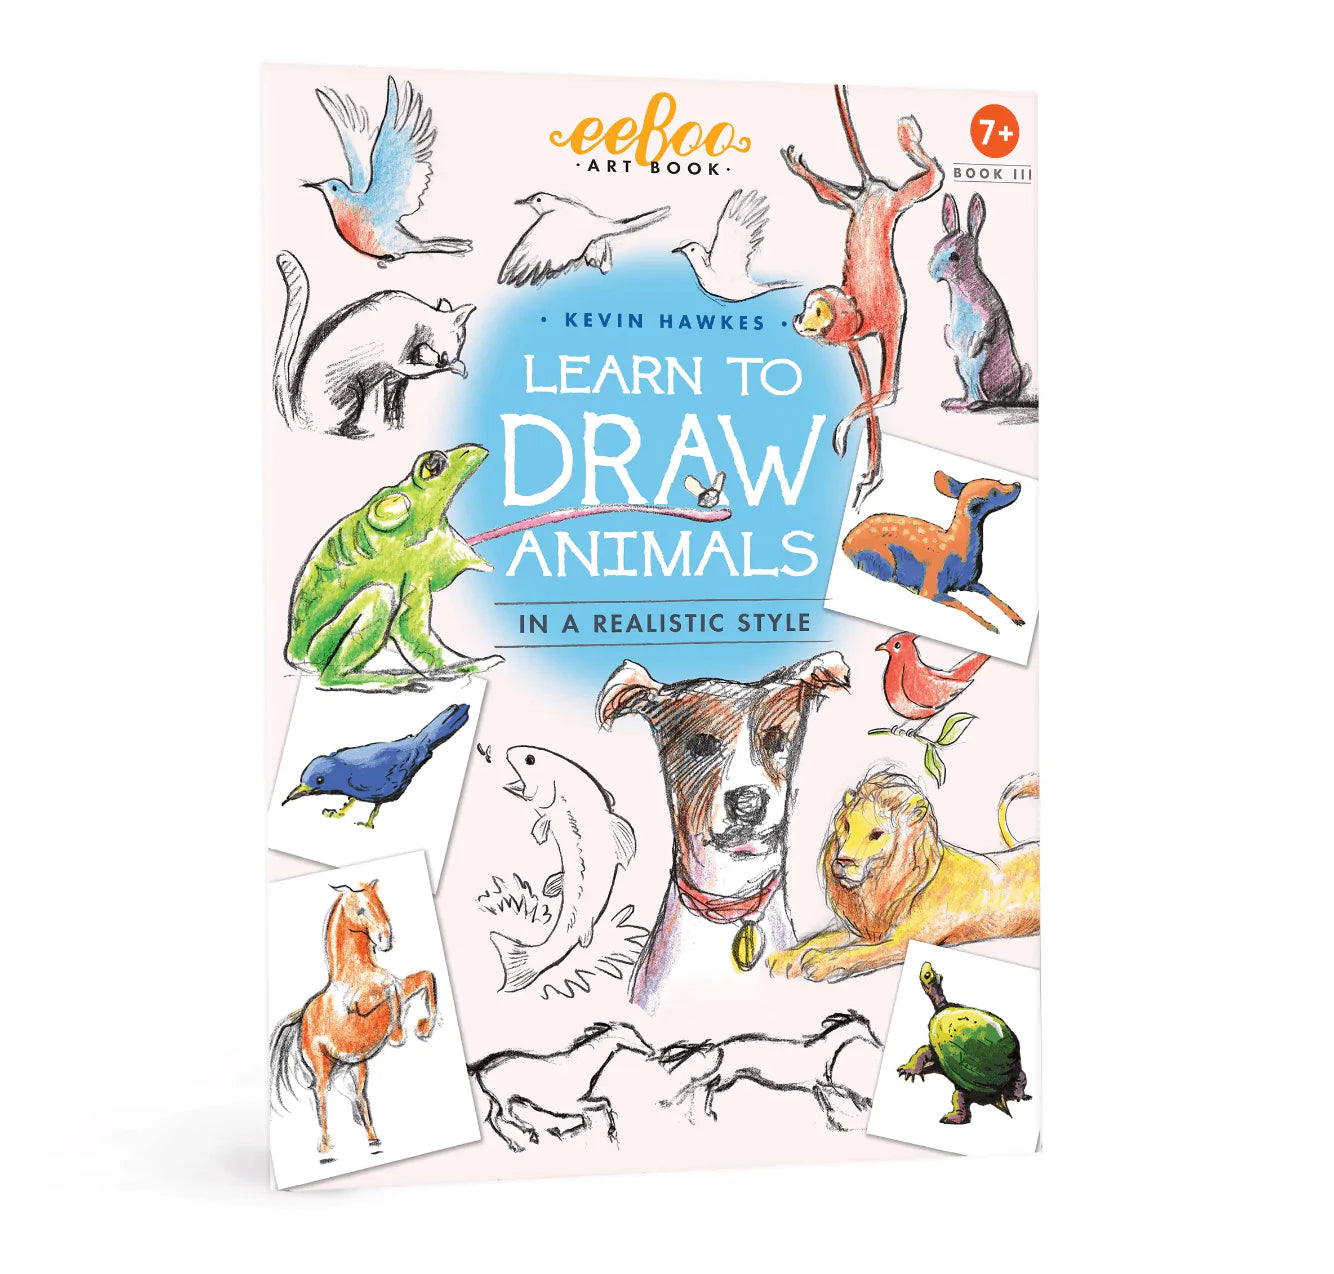 The Curated Parcel - Eeboo - Learn To Draw Animals 